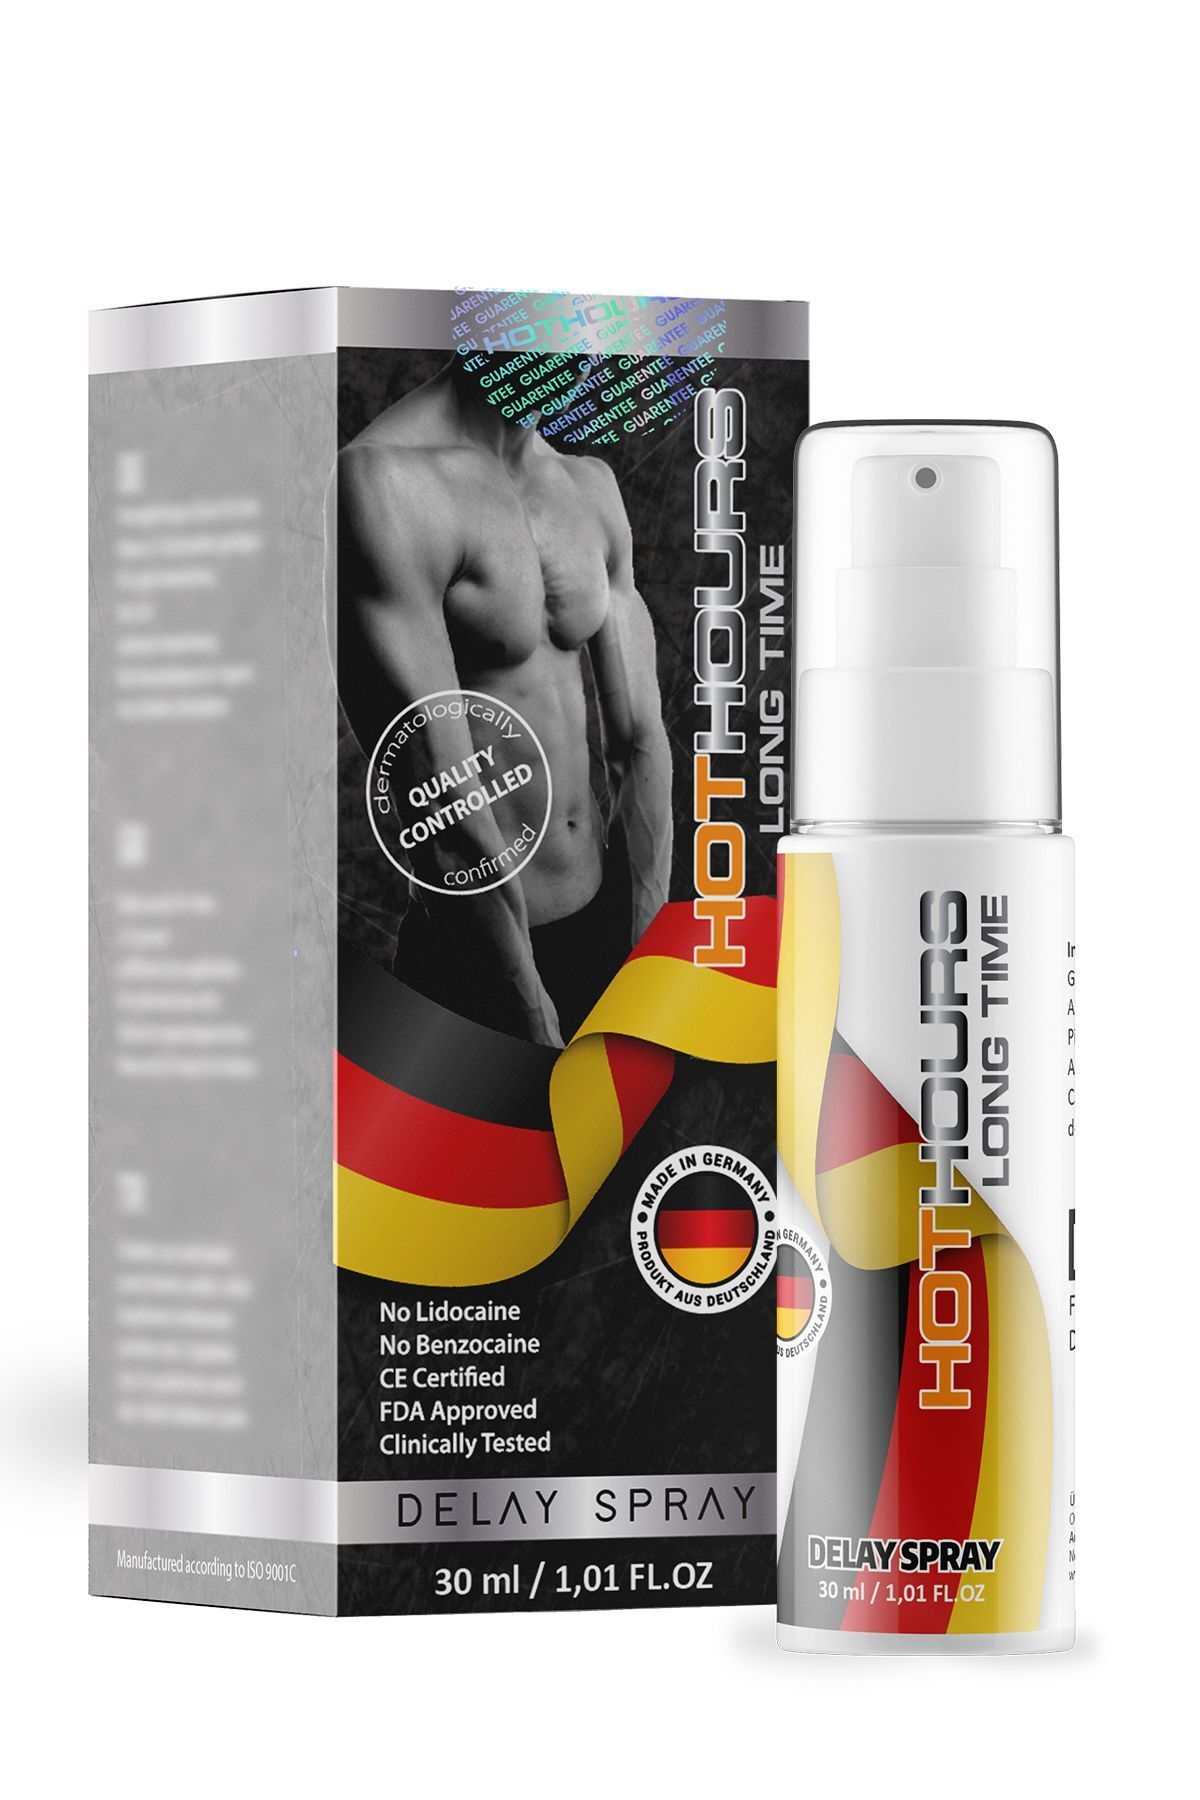 Hot Hours Long Time Sprey 30ml Made In Germany